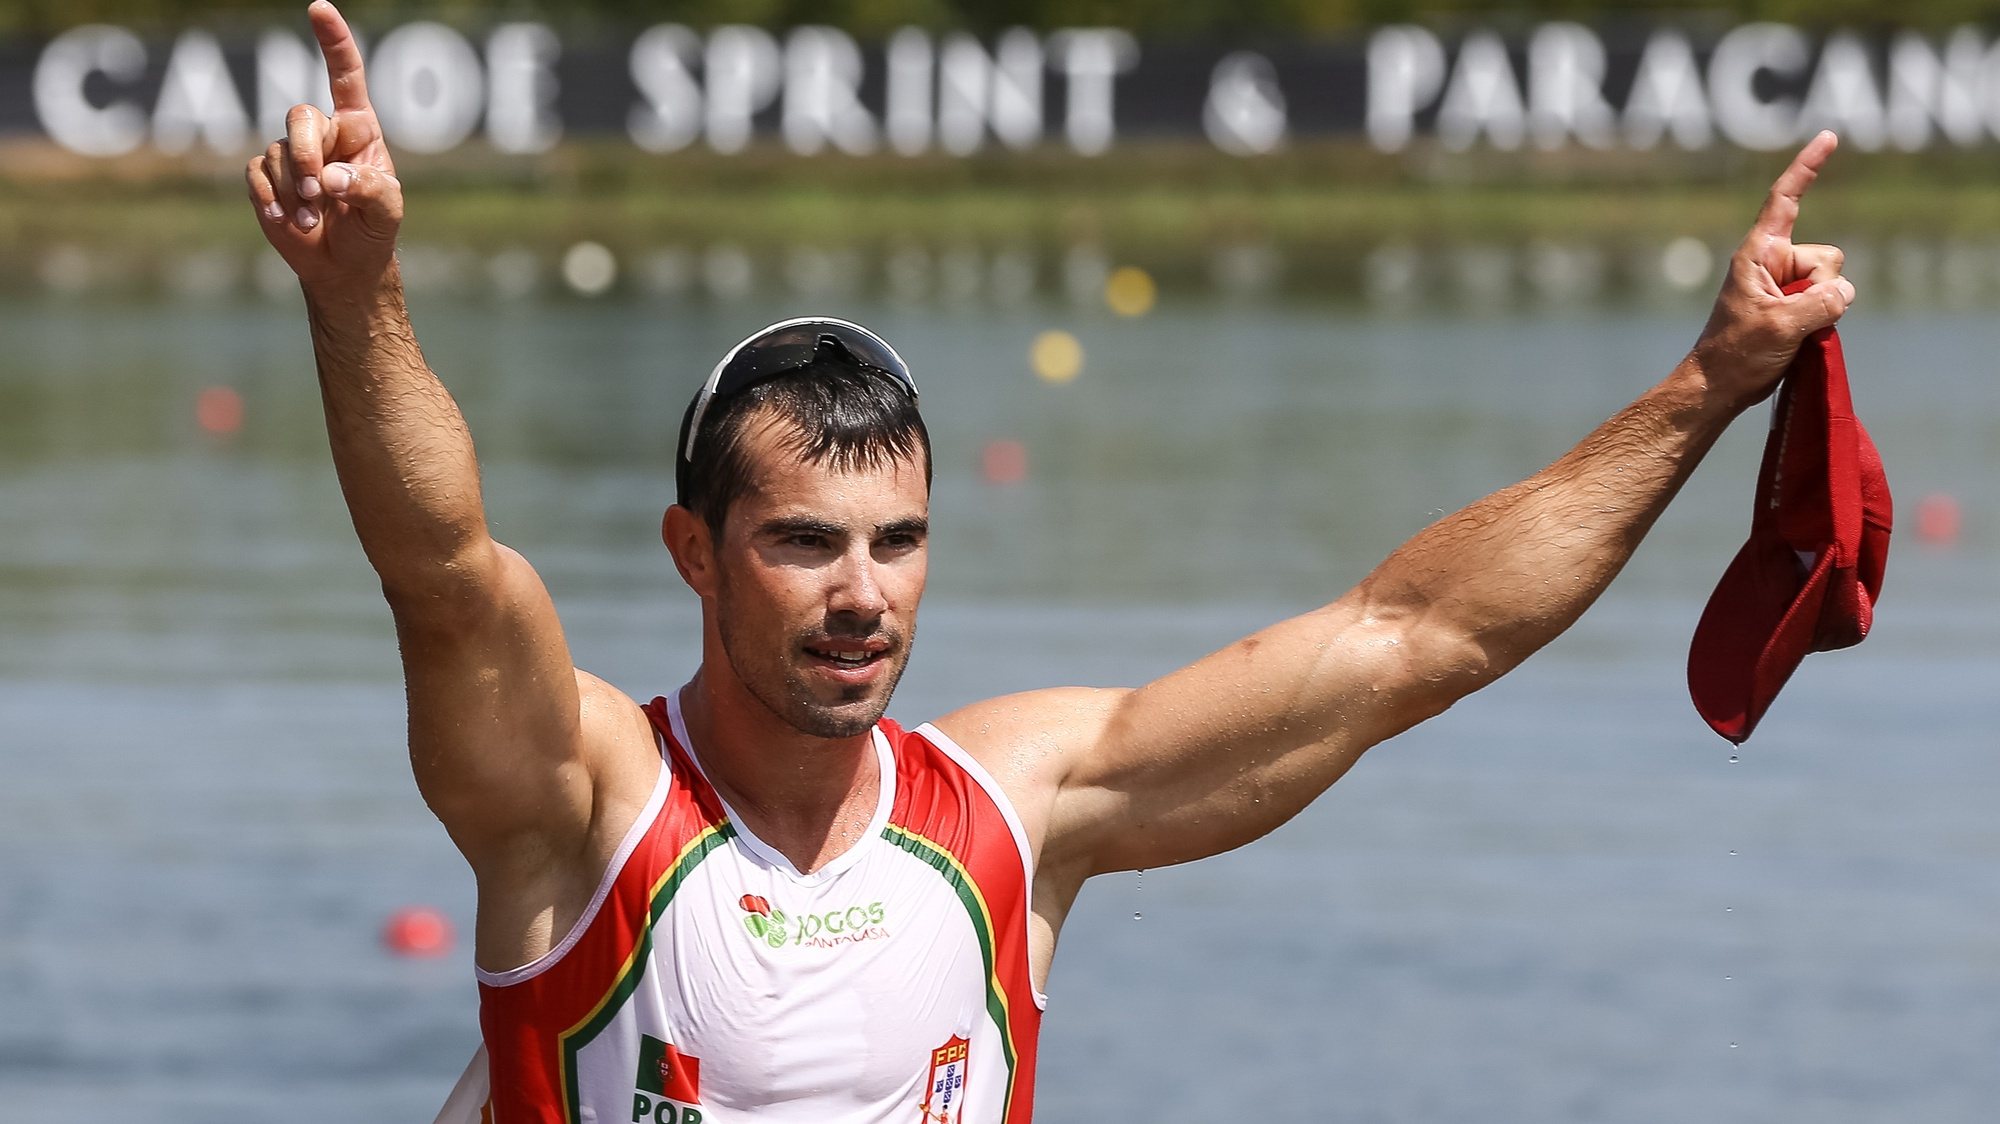 epa06970925 Portugal&#039;s Fernando Pimenta celebrates after win the K1 men Final at 2018 ICF Canoe Sprint World Championships, in Montemor-o-Velho, center of Portugal, 25 August 2018. The event runs from 23 to 26 August.  EPA/PAULO NOVAIS